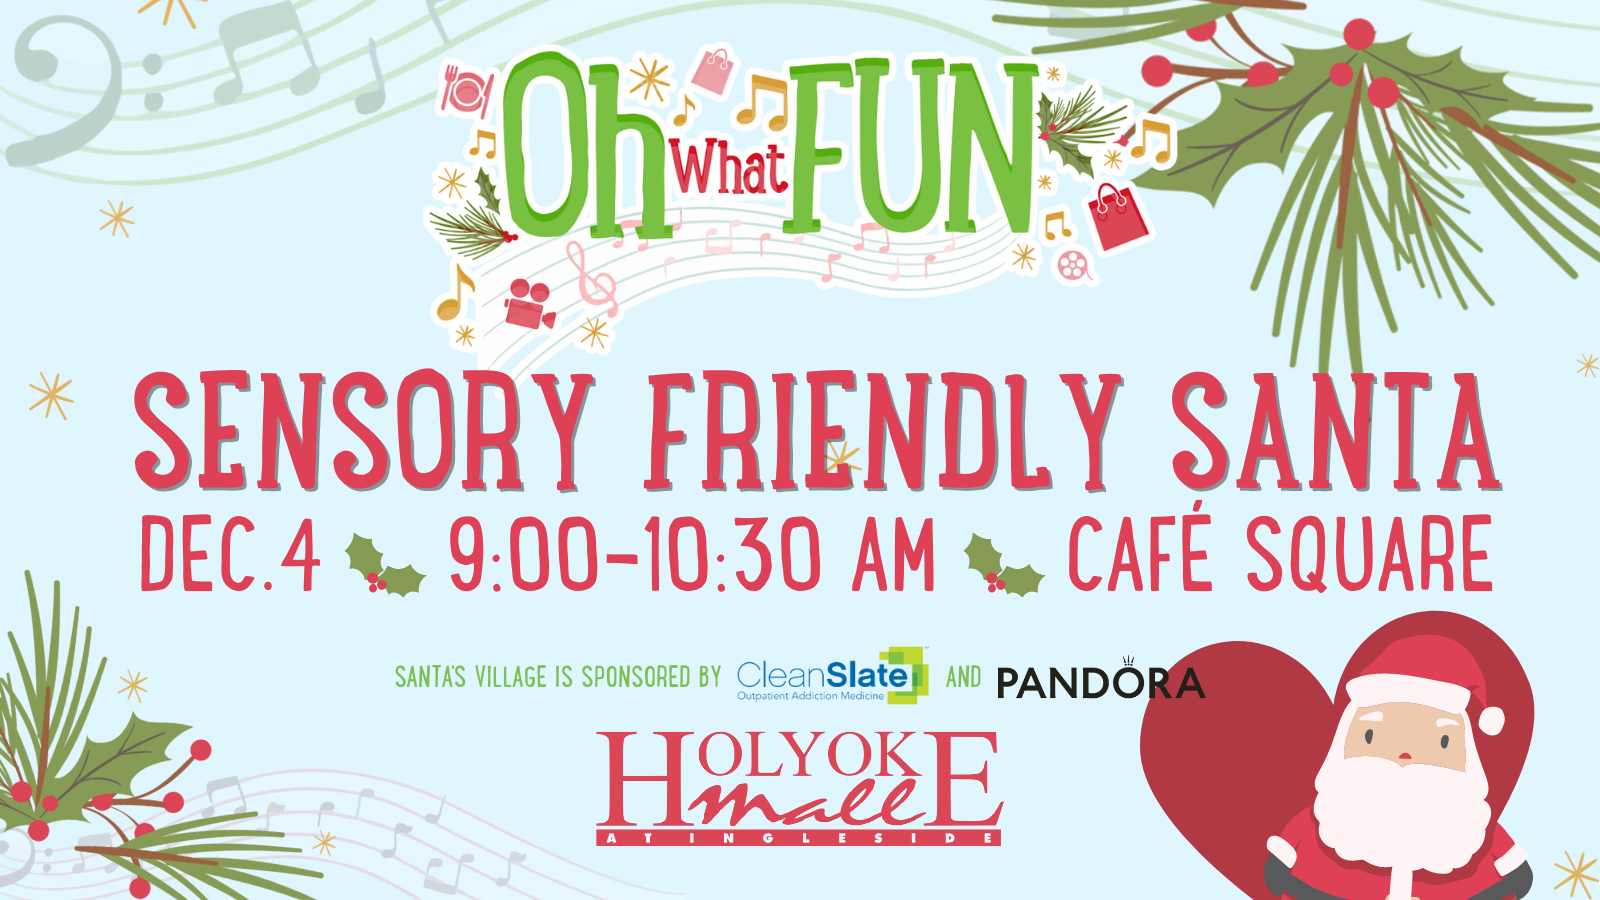 Sensory Friendly Santa on December 4 from 9:00 to 10:30am in Café Square